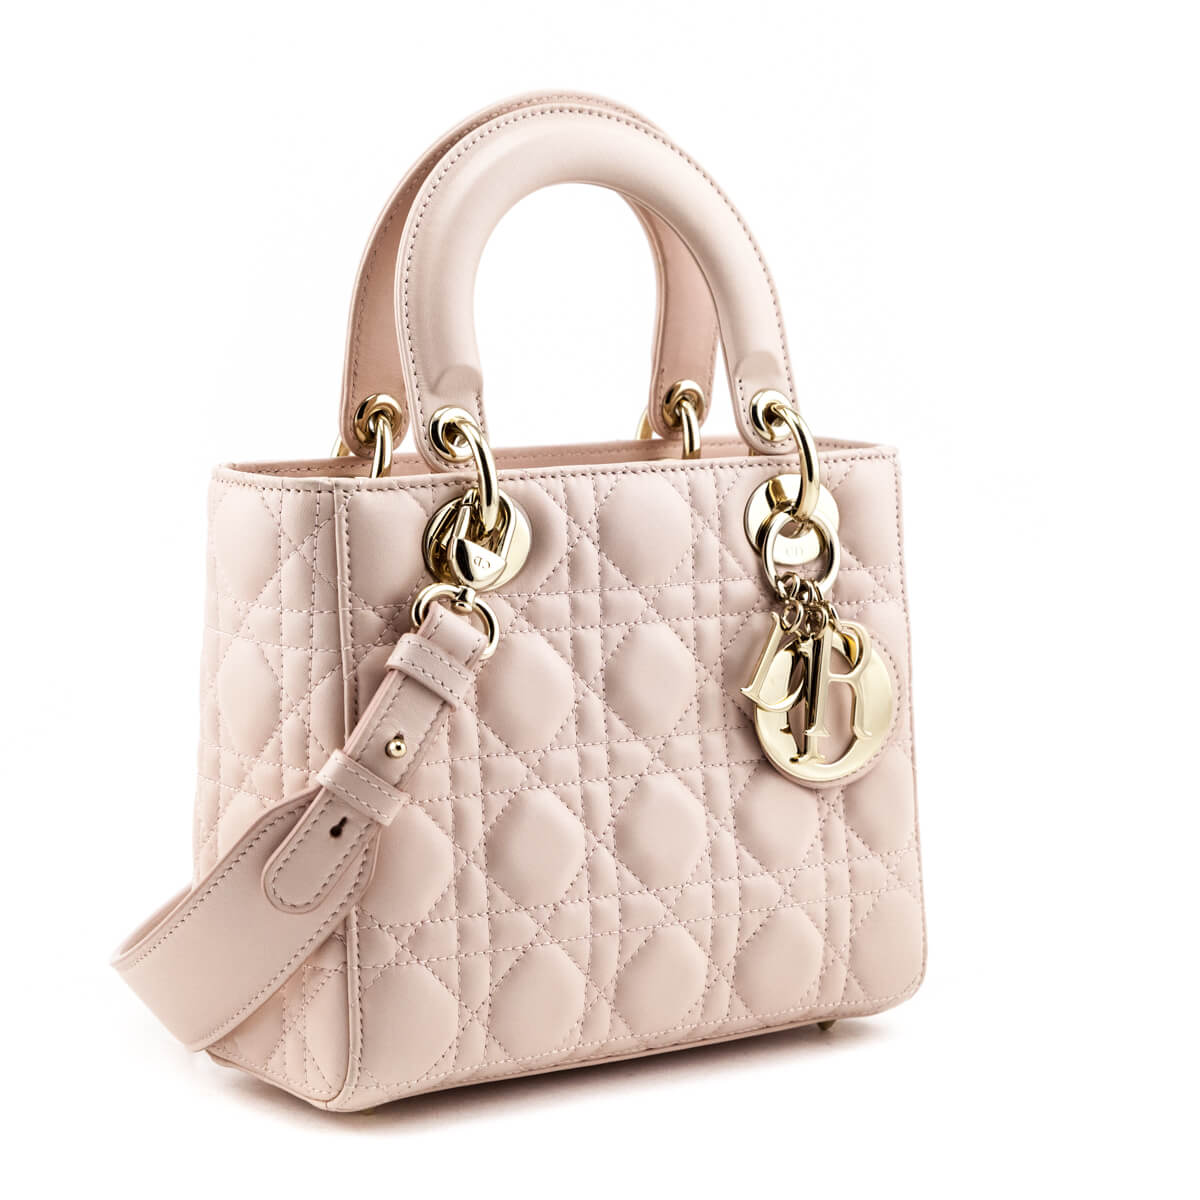 Lady Dior Blush Pink Cannage - Preloved Luxury Bags